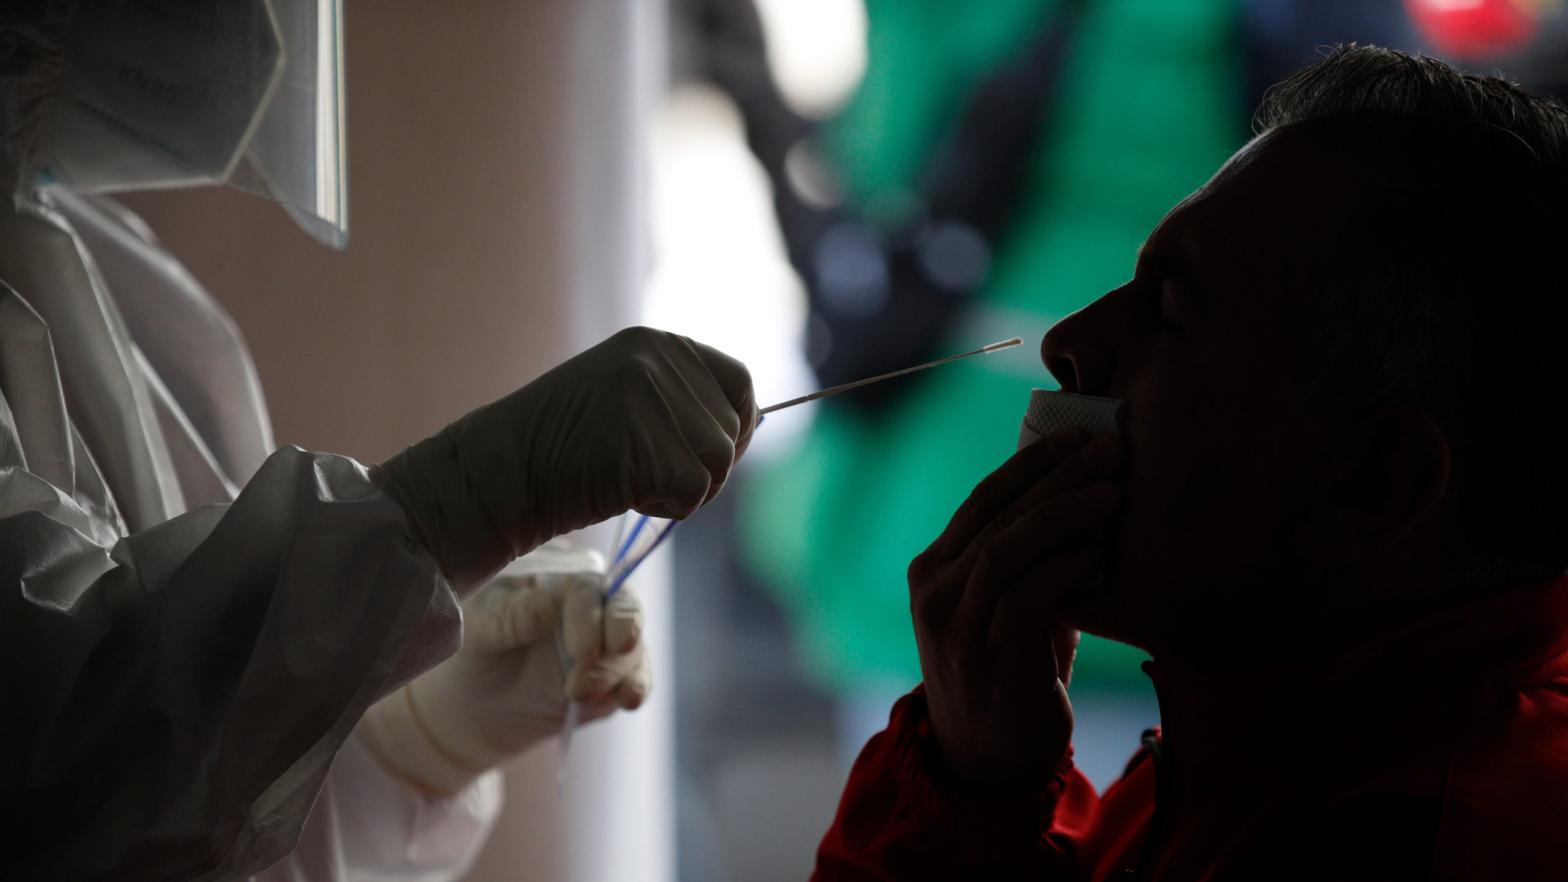 A patient in Mexico City, Mexico receiving a covid-19 nasal swab test in December 2020. (Photo: Rebecca Blackwell, AP)